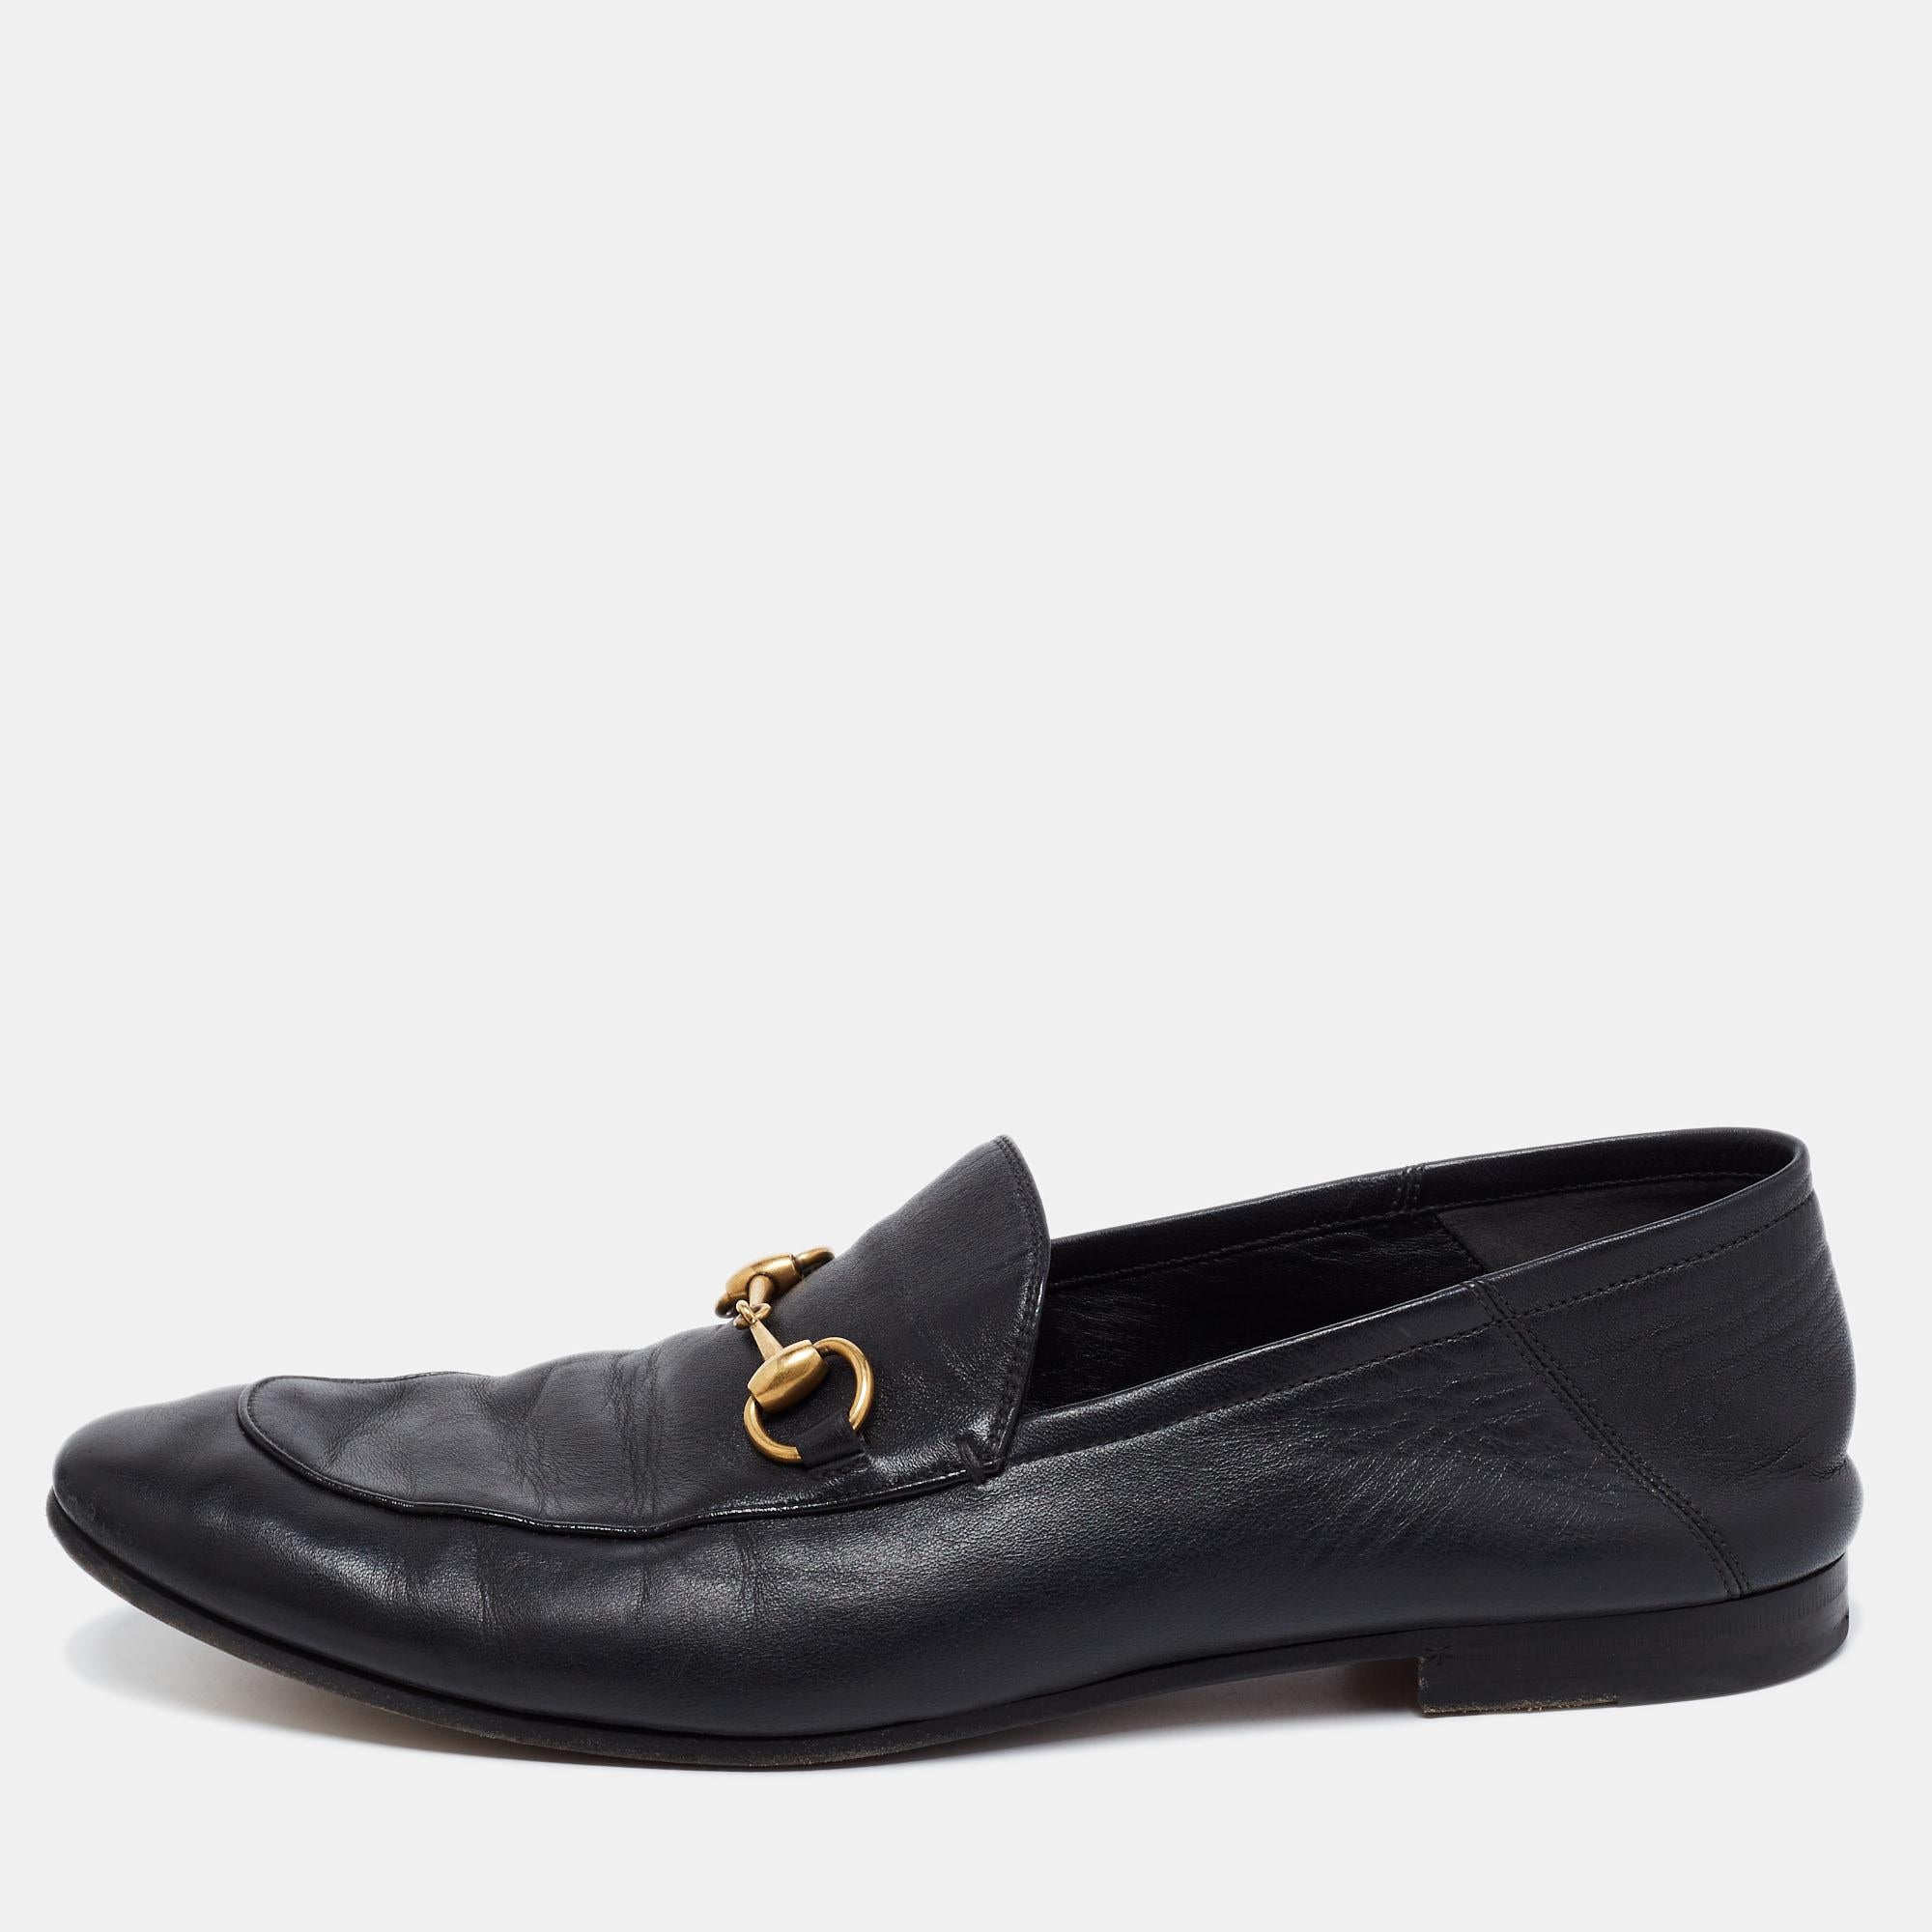 The Jordaan is a shoe that has a modern finish and a signature appeal. It has an elongated toe and the Gucci Horsebit motif gracing the uppers. This pair is crafted from leather and sewn with utmost care to envelop your feet with luxury.